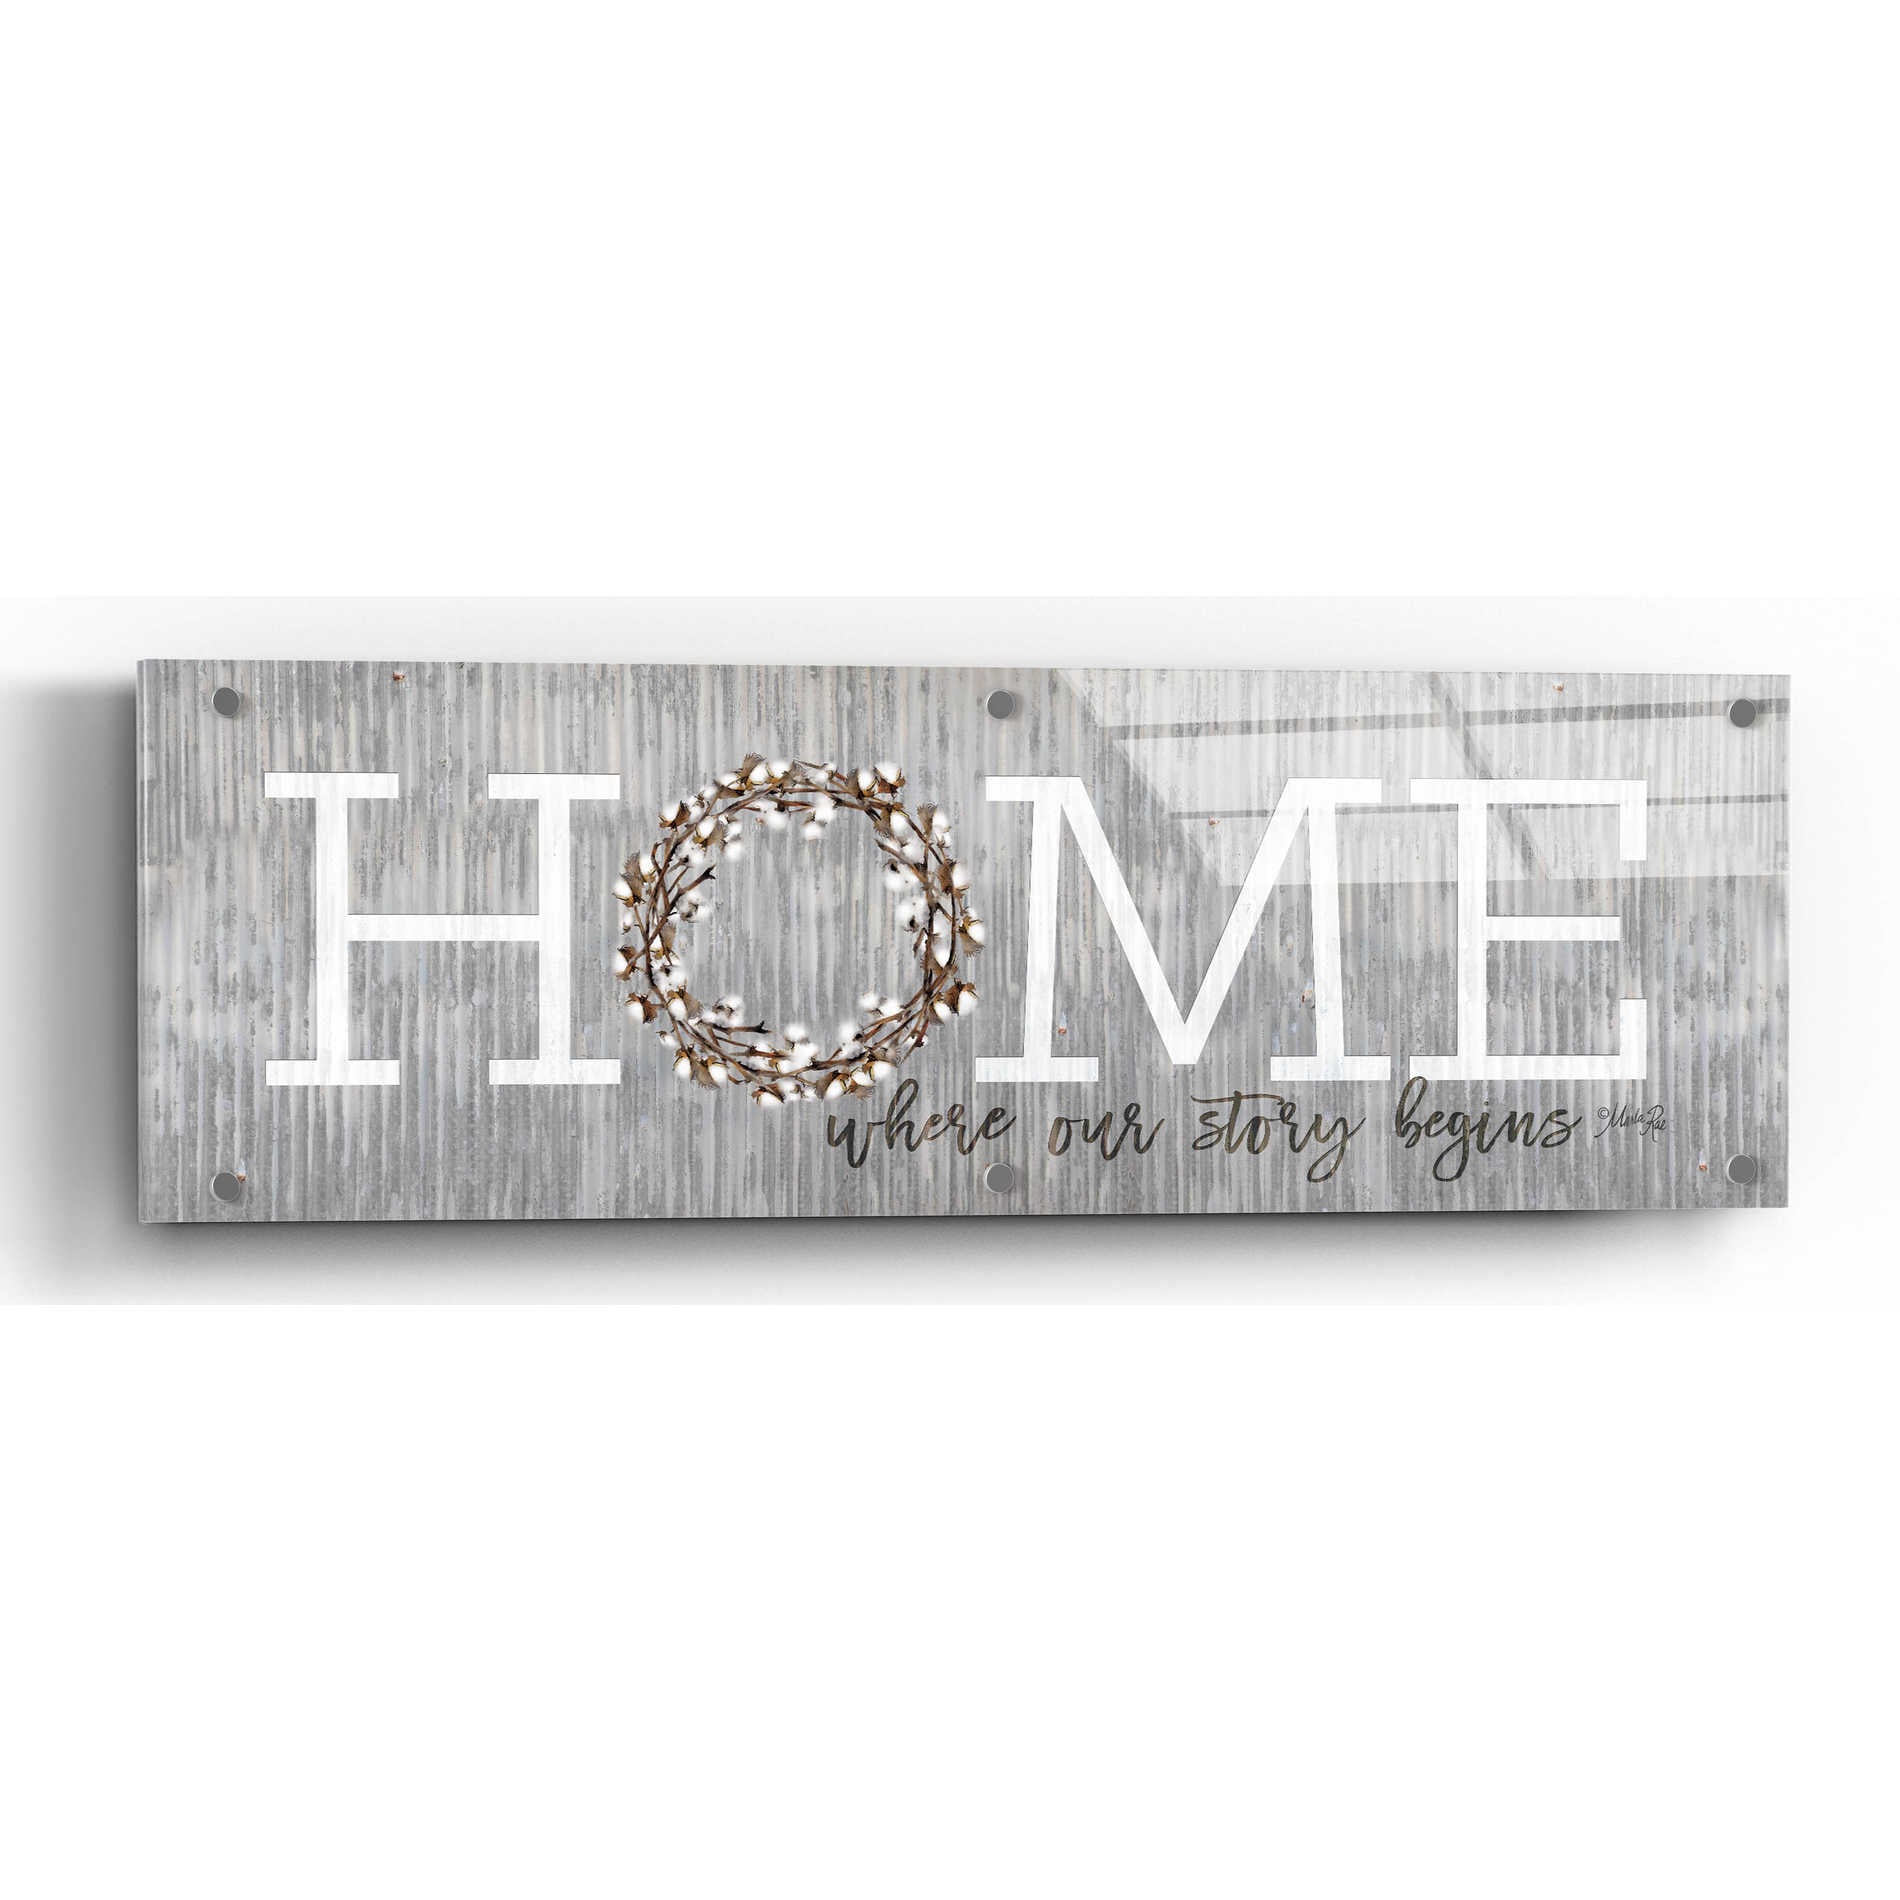 Epic Art 'Home - Where Our Story Begins' by Marla Rae, Acrylic Glass Wall Art